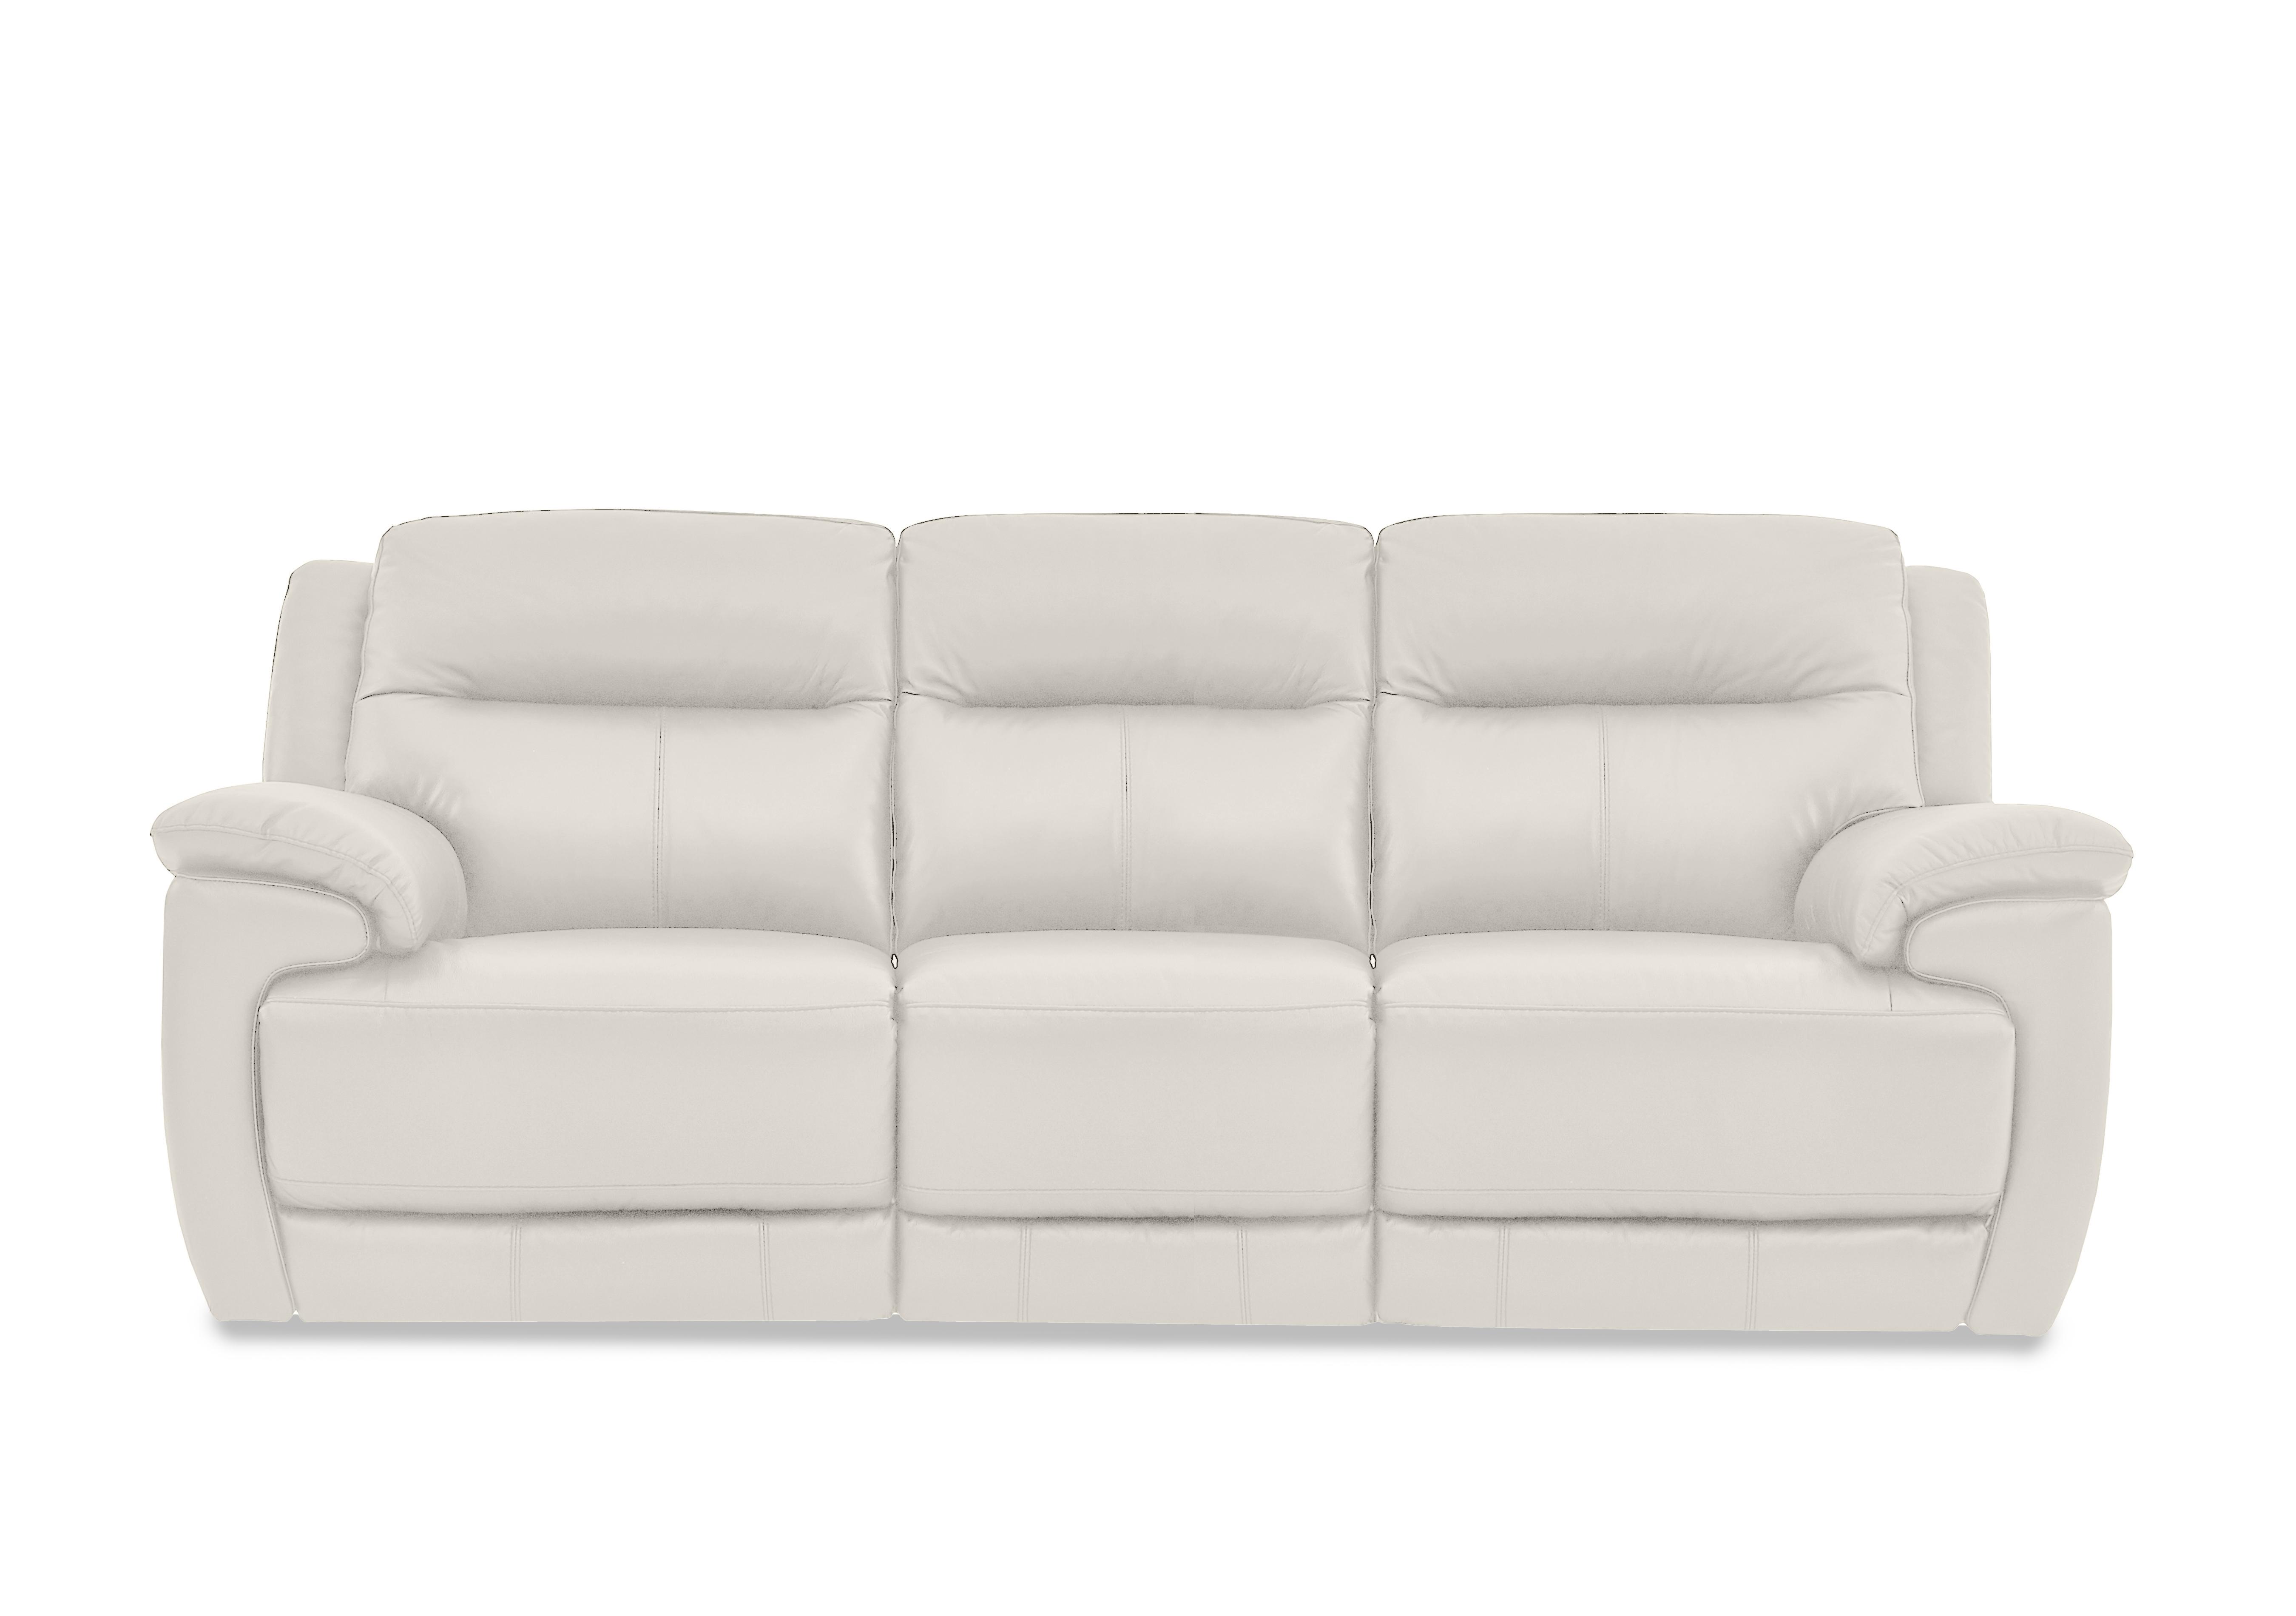 Touch 3 Seater Leather Sofa in Bv-156e Frost on Furniture Village